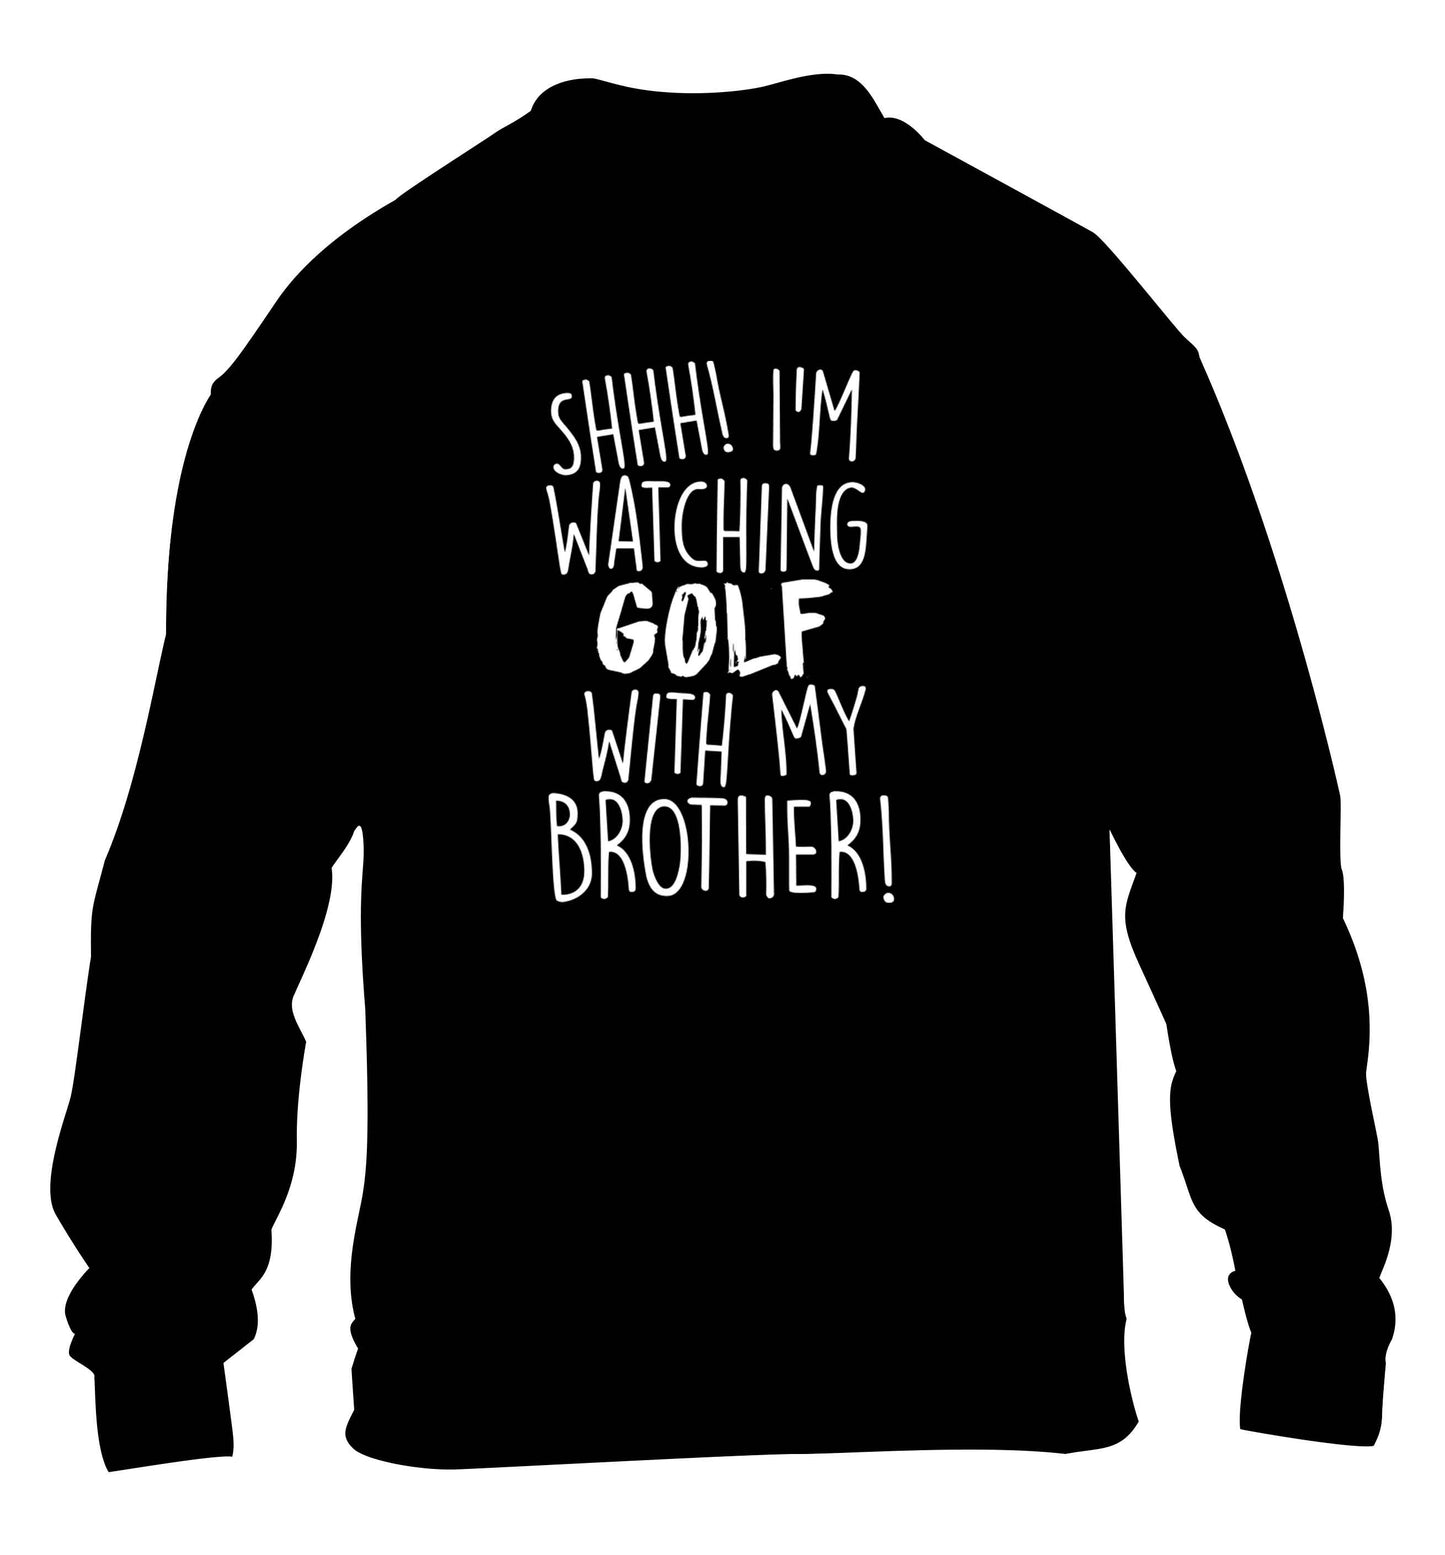 Shh I'm watching golf with my brother children's black sweater 12-13 Years